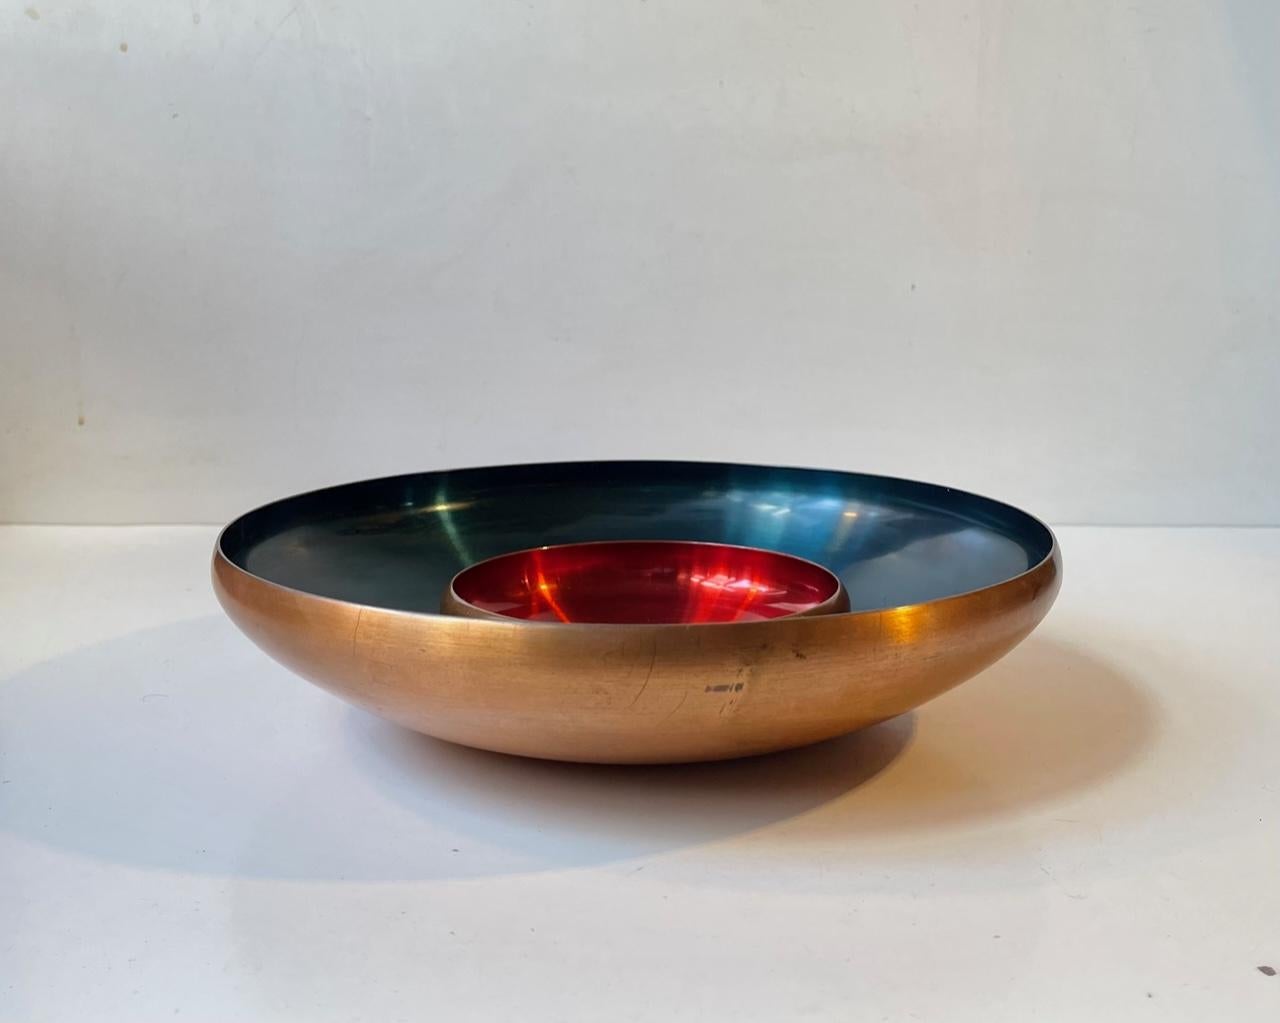 Danish Modernist solid Copper Bowls with interior red and petrol-blue enamel/anodization. Manufactured and designed by Corona in Denmark during the 1960s. Reminiscent in style to similar designs by Torben Orskow, Herbert. Krenchel - Krenit and